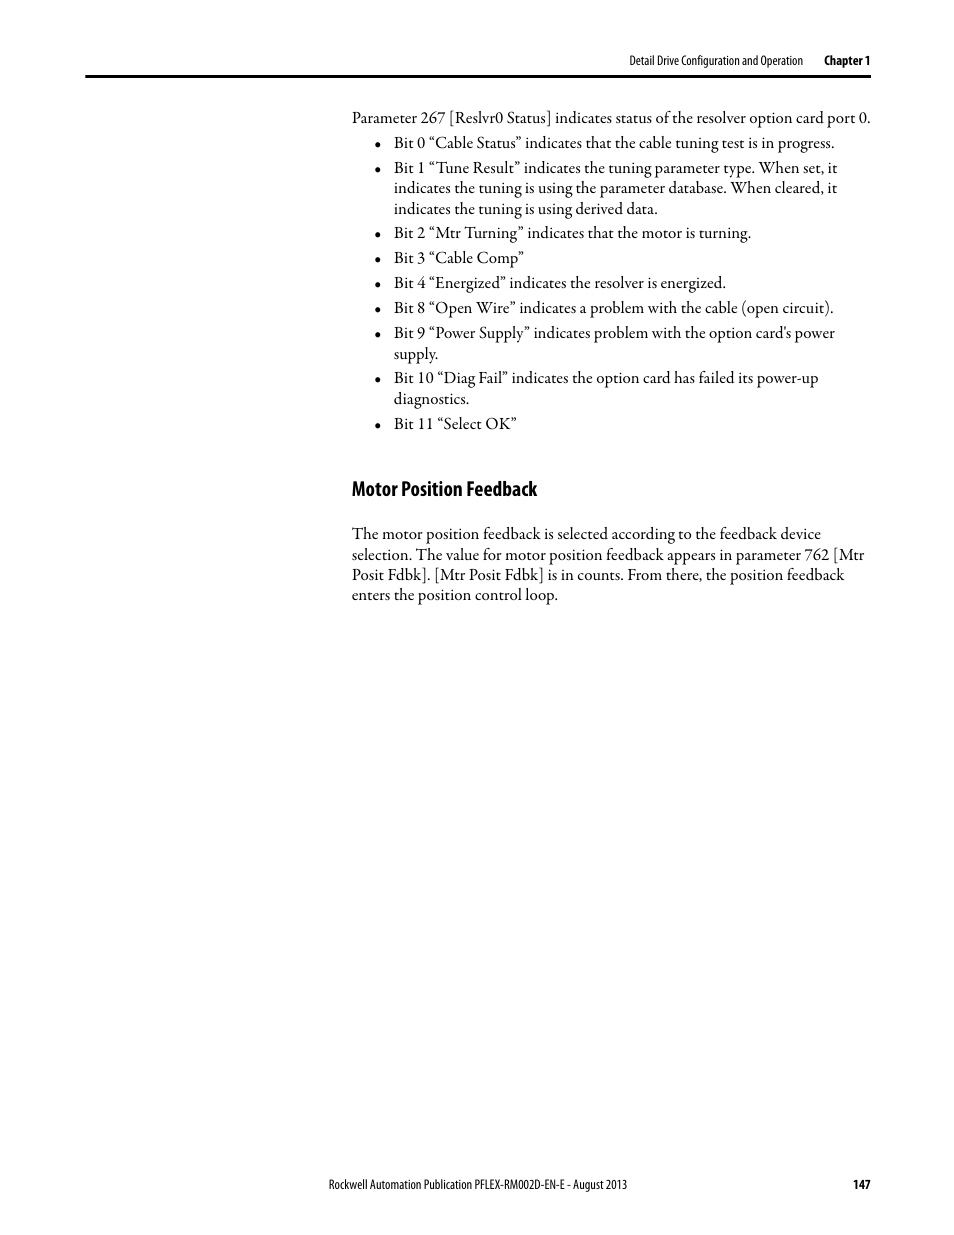 Motor position feedback | Rockwell Automation 20D PowerFlex 700S with Phase I Control Reference Manual User Manual | Page 147 / 190